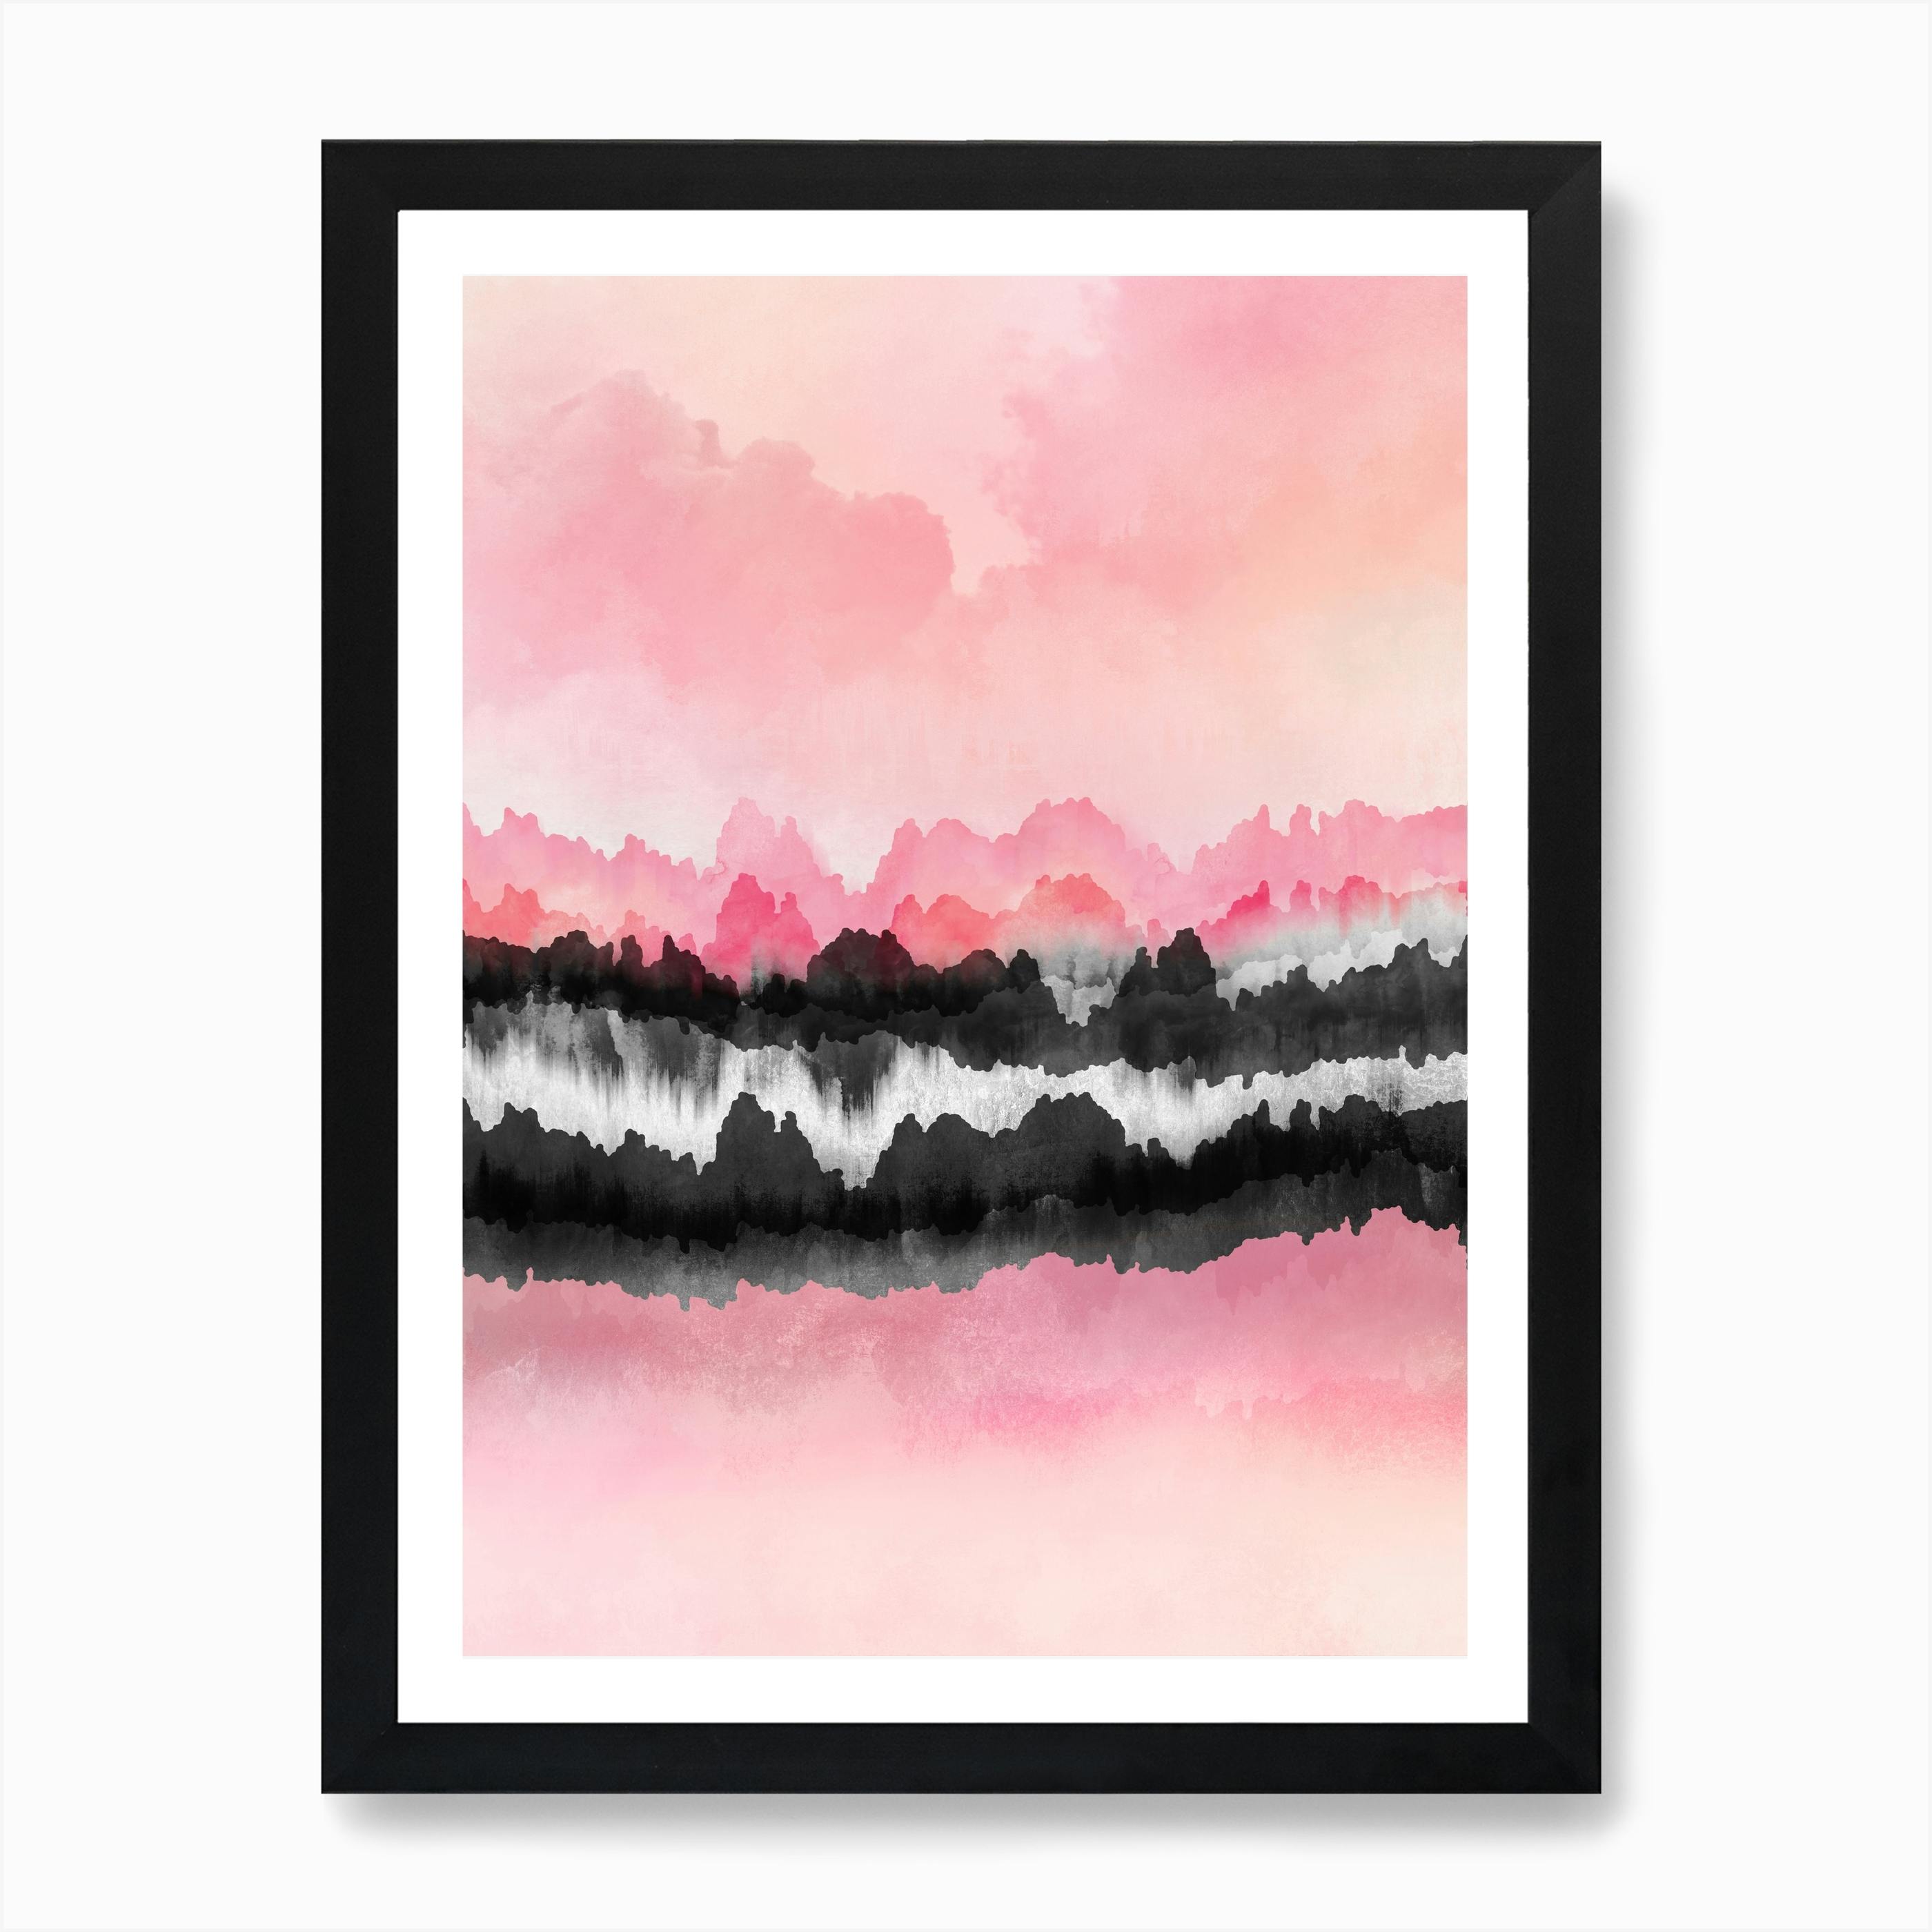 original painting print,art Colorado mountain print Print of pink mountains giclee print,smooth and velvety print,gold frame optional